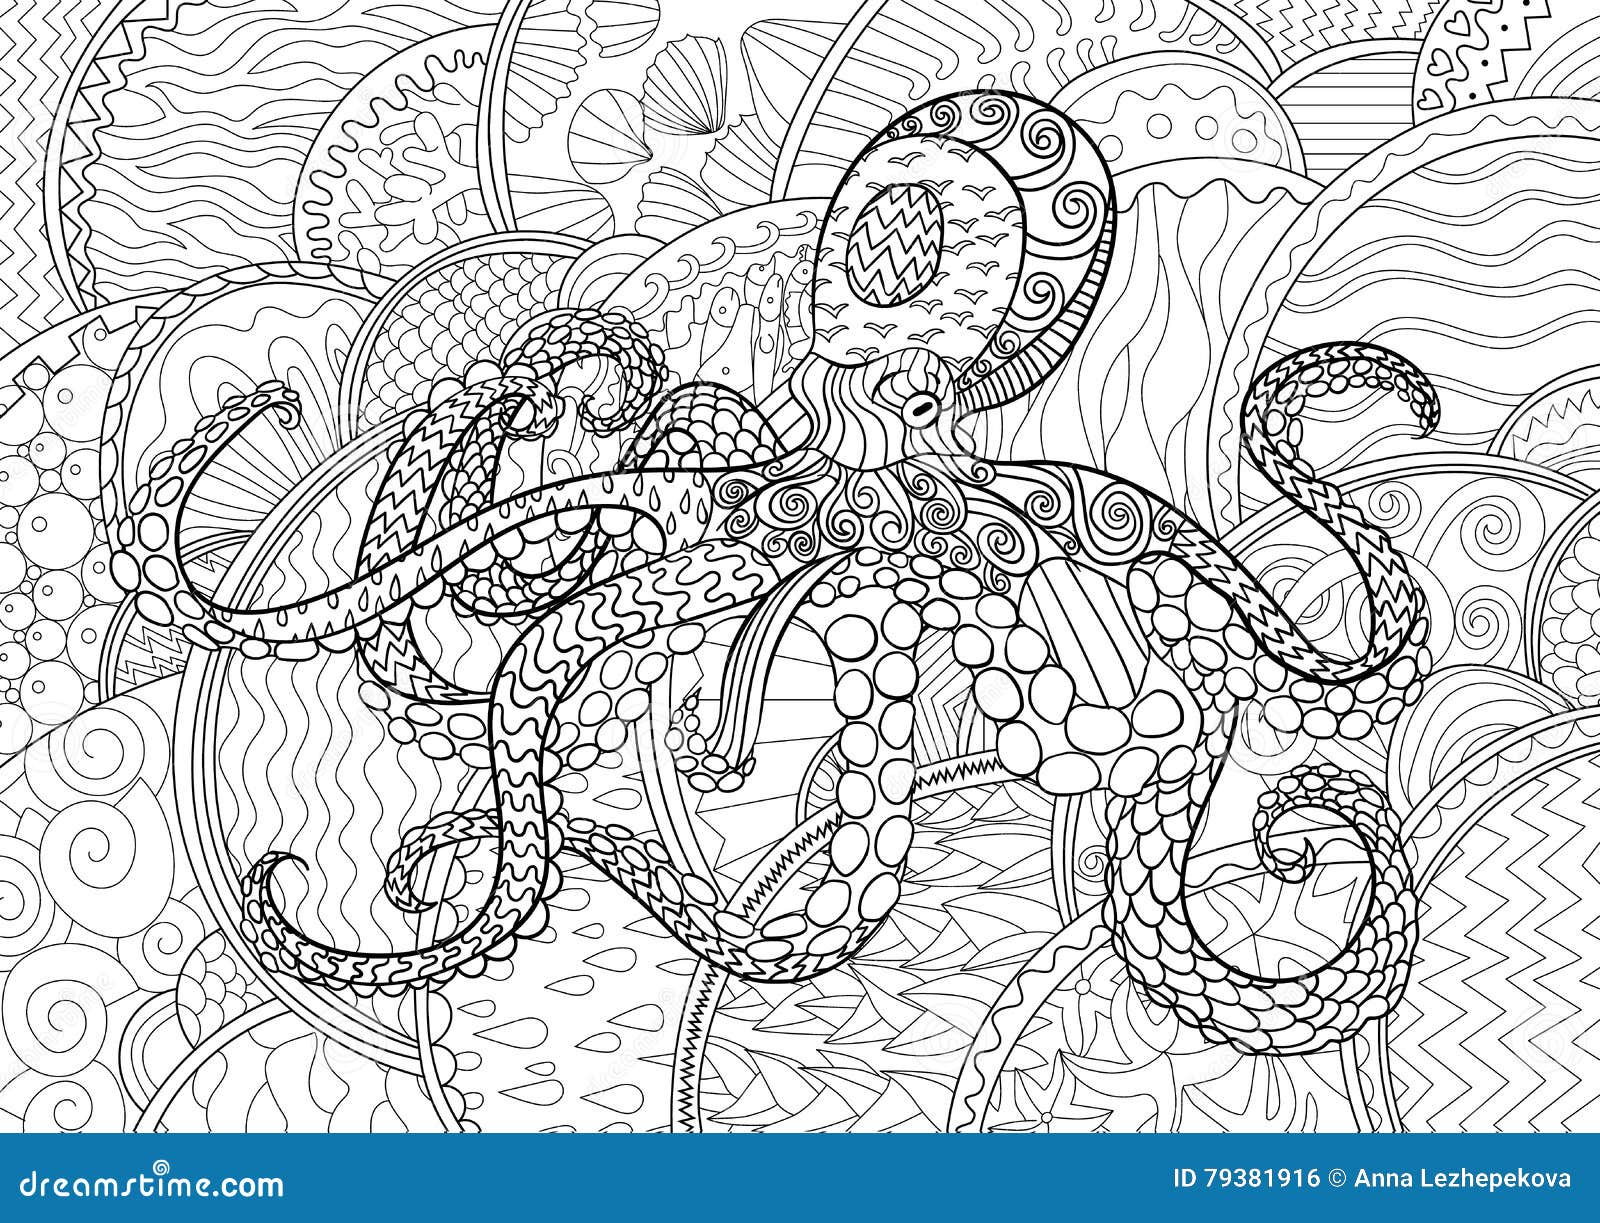 Octopus with high details